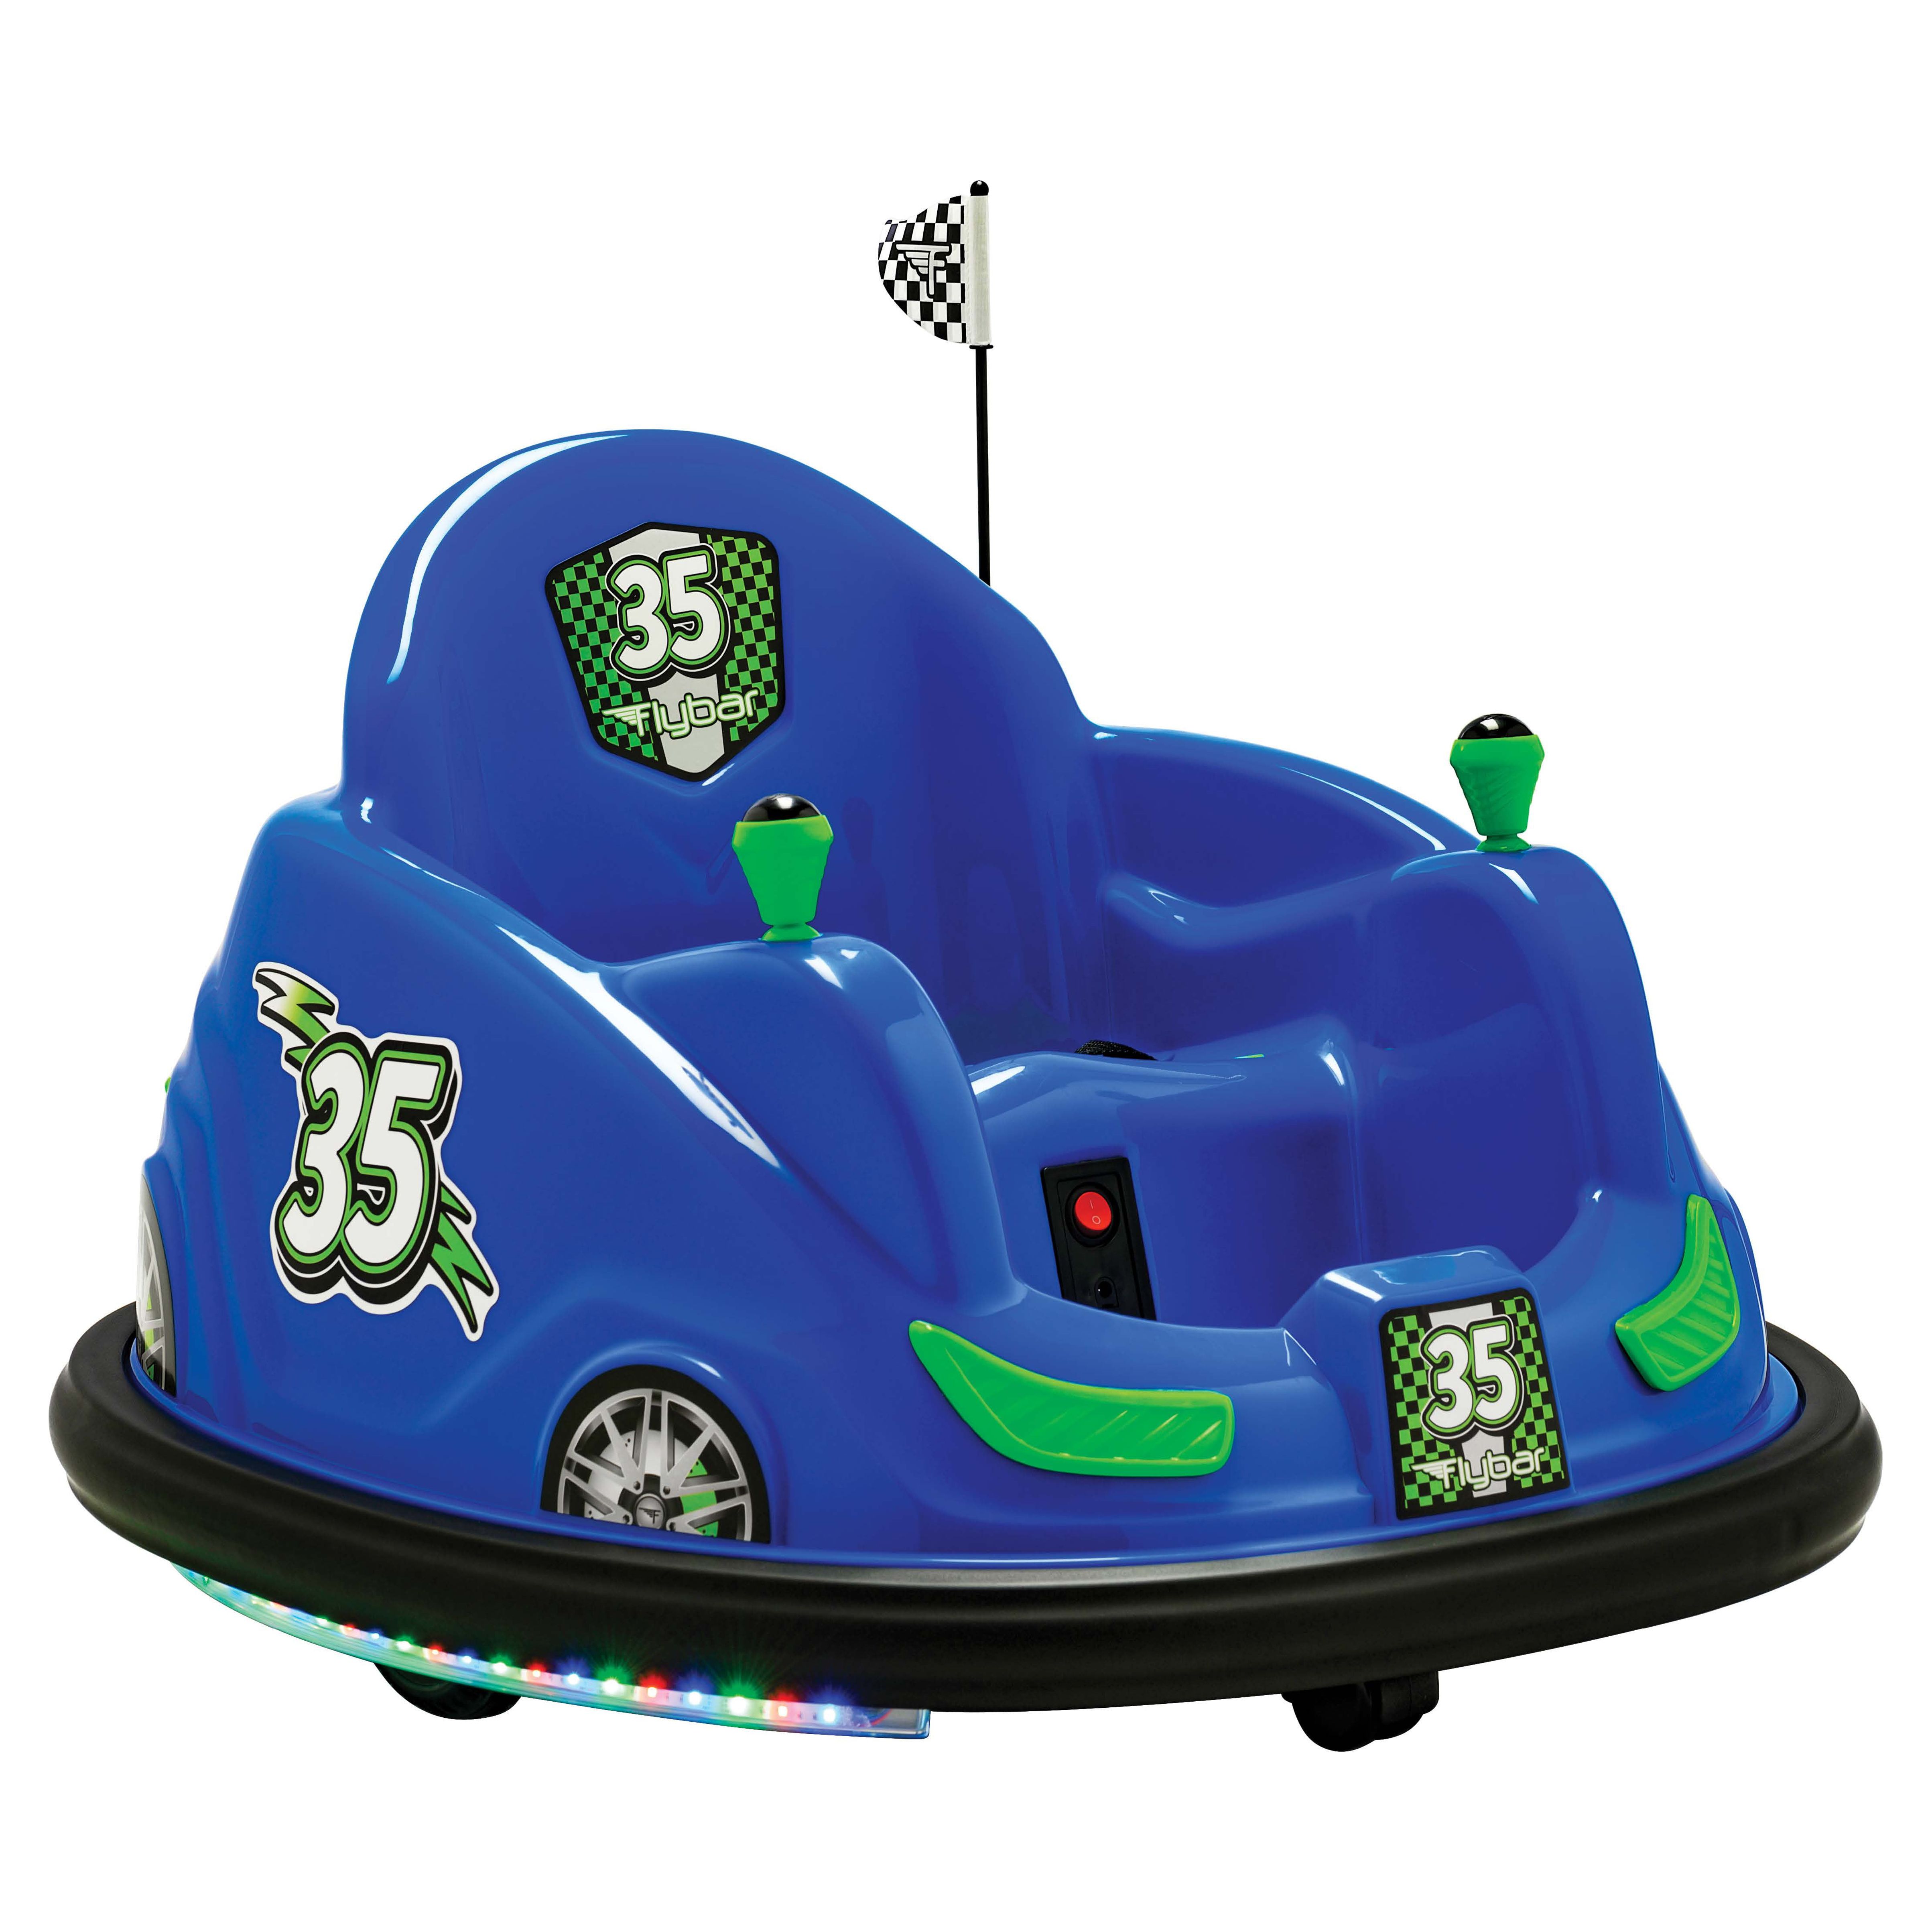 Flybar 6 Volts Bumper Car, Battery Powered Ride on, Fun LED Lights, Includes Charger, Blue - image 4 of 10